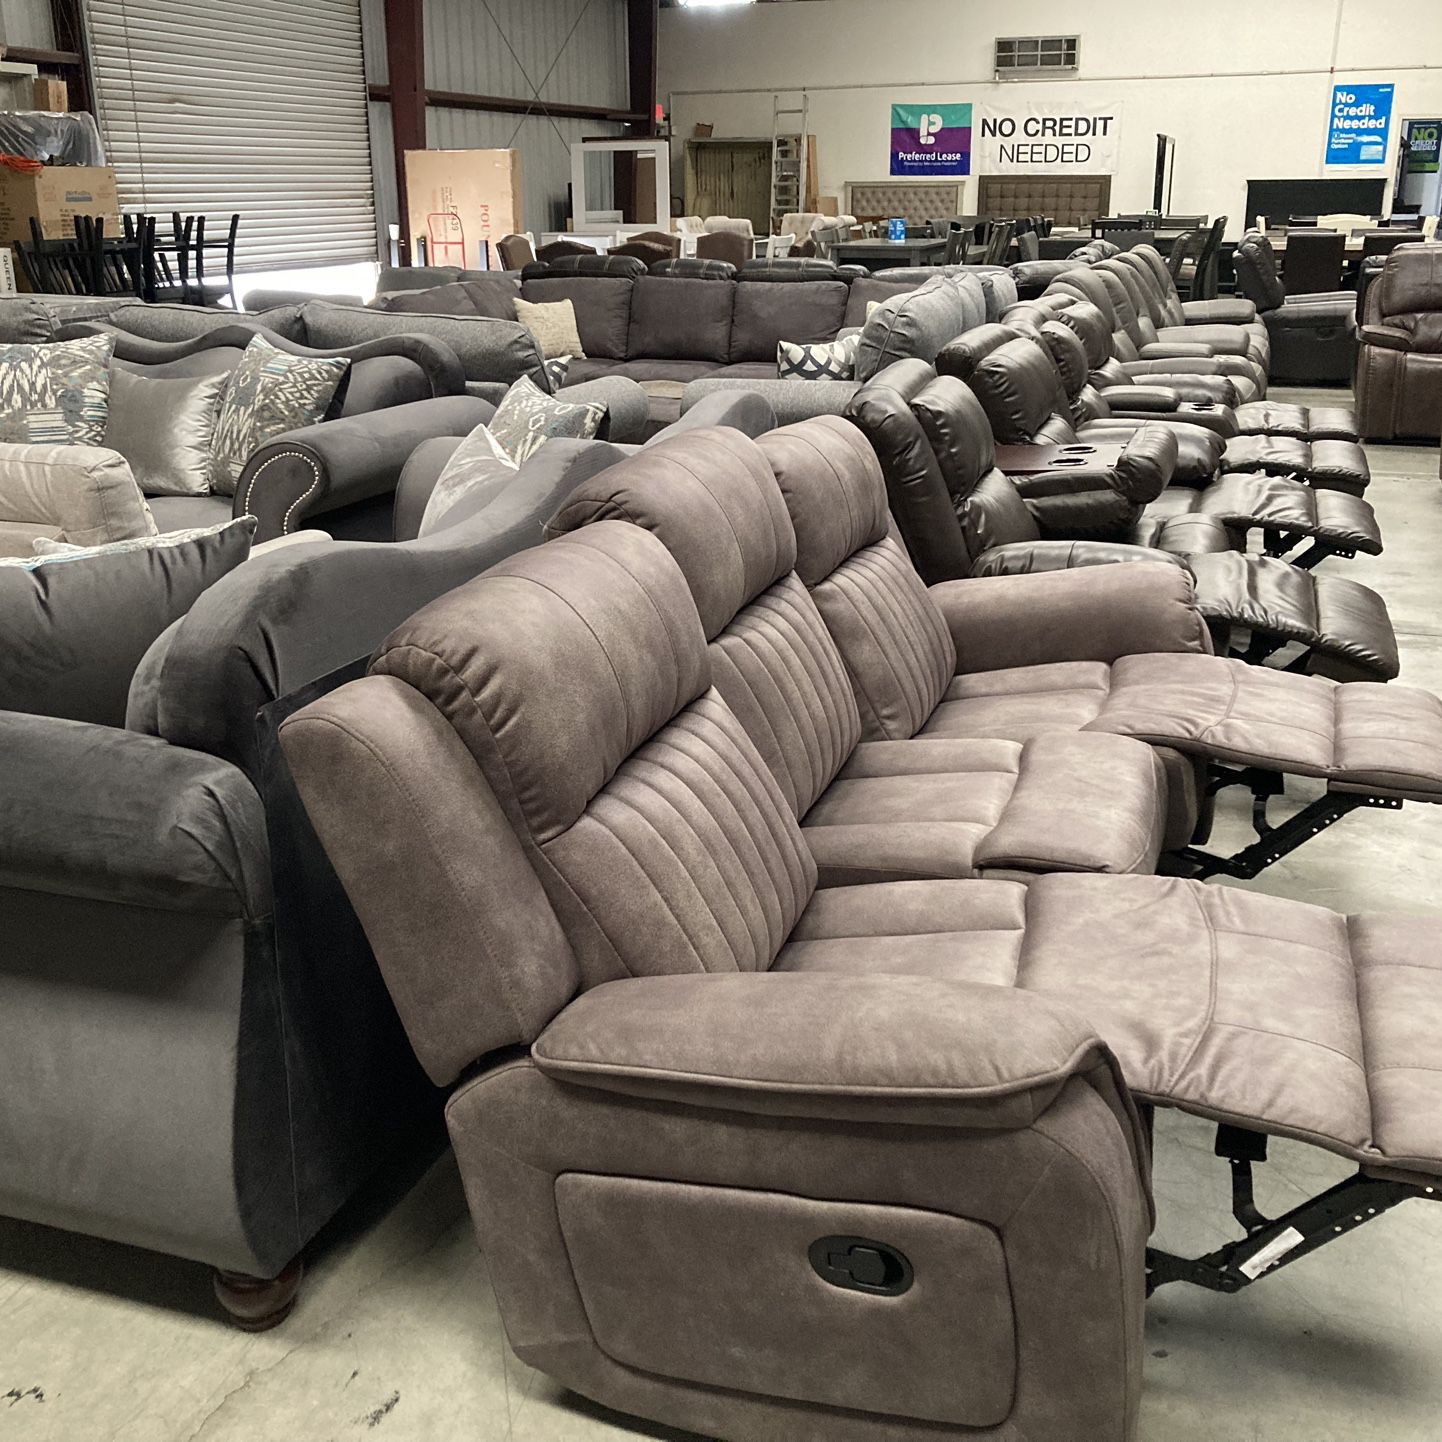 Sofa Sets And Sectionals From $595 And Up. Locally Owned And Operated Since 2006